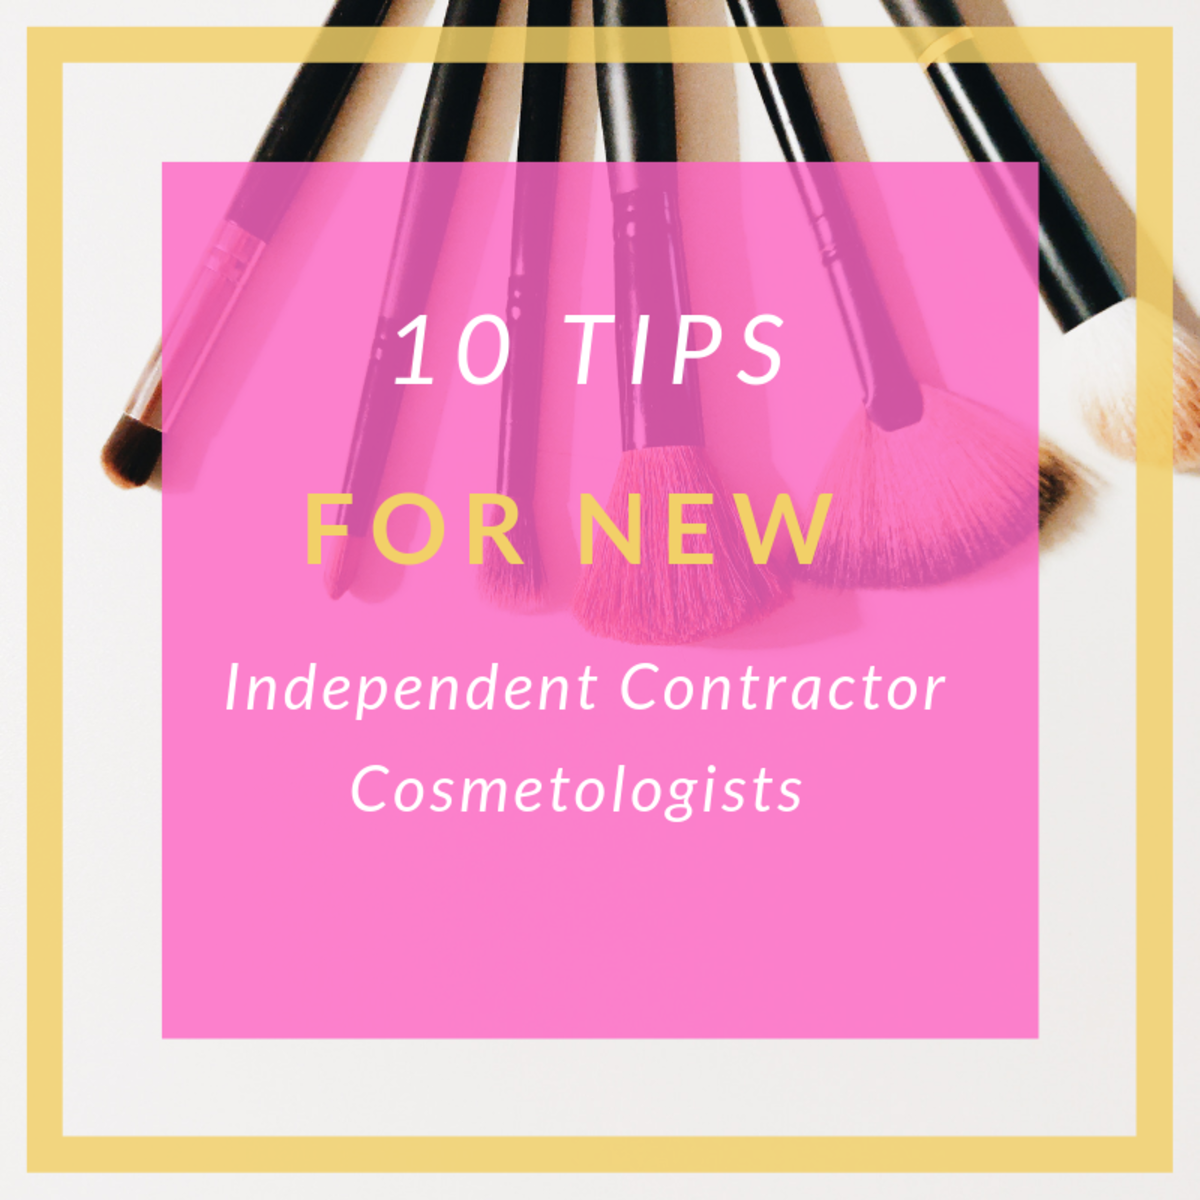 10-ways-to-fail-as-a-new-independent-contractor-hairstylist